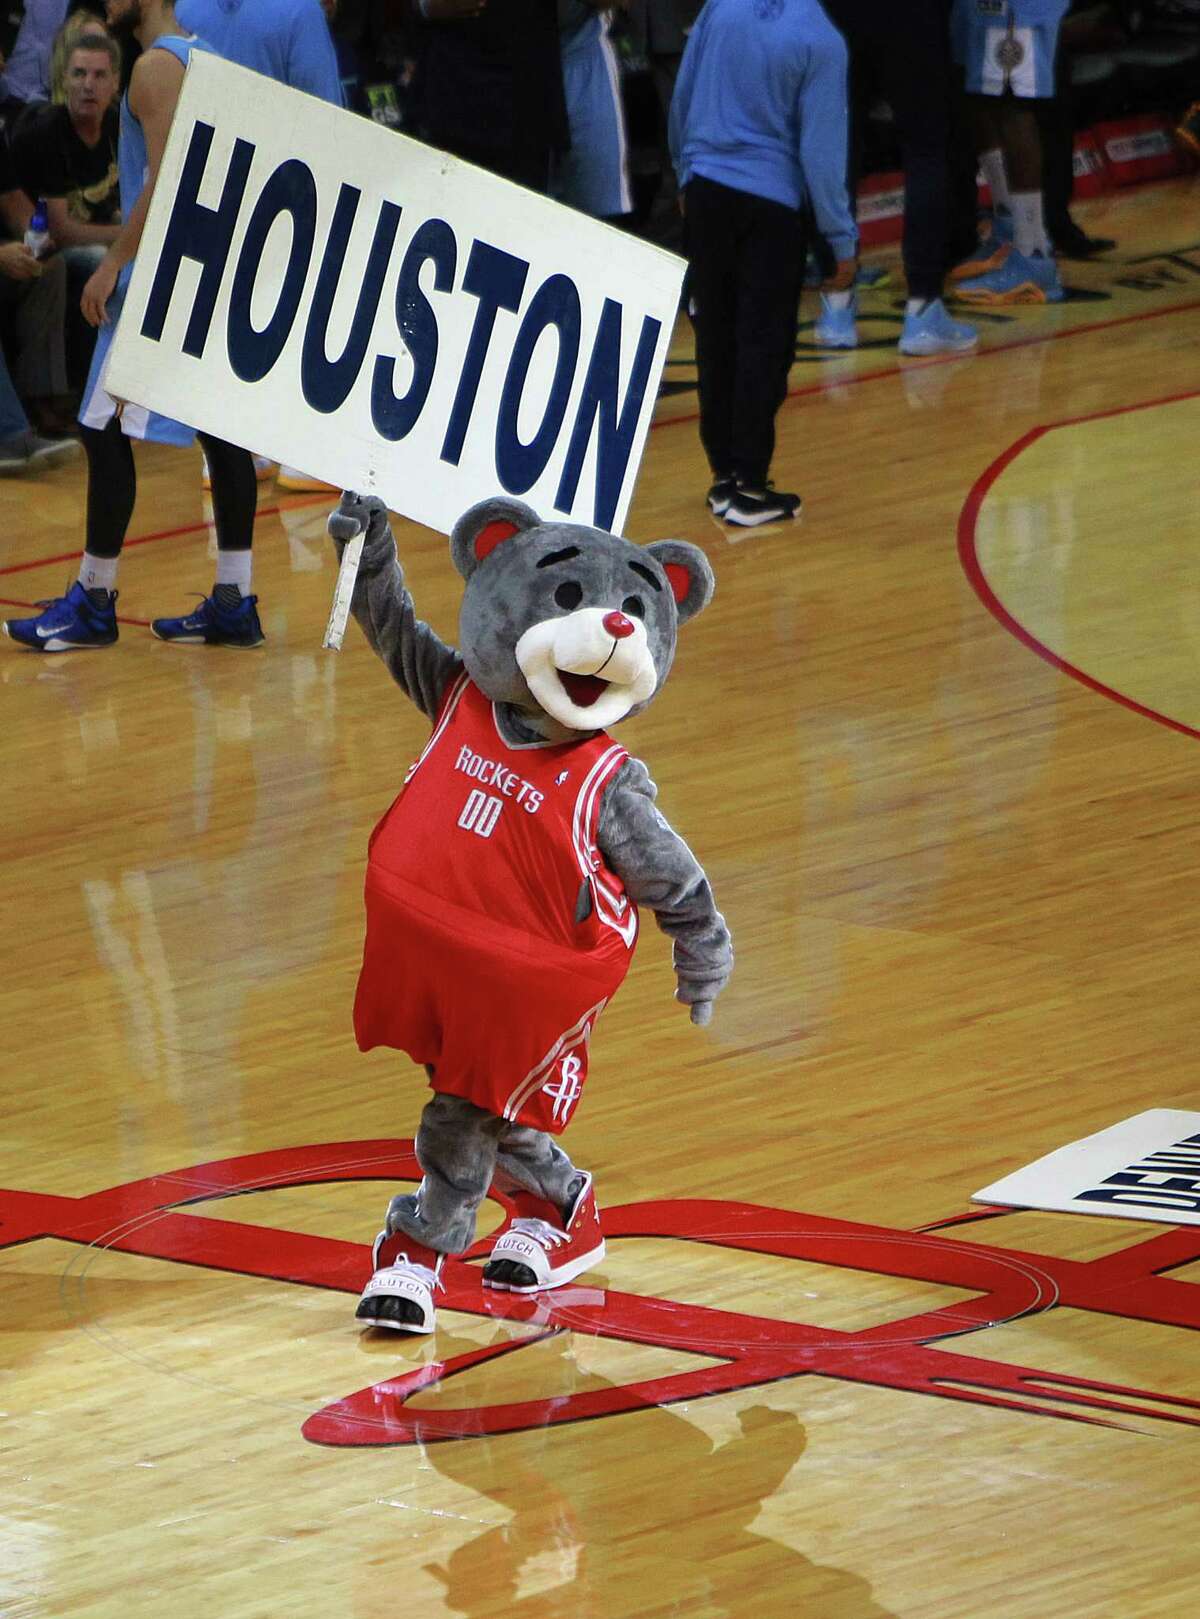 Clutch cheers on the crowd before the Houston Rockets take on the Denver Nuggets, Wednesday, Oct. 28, 2015, in Houston.( Mark Mulligan / Houston Chronicle )